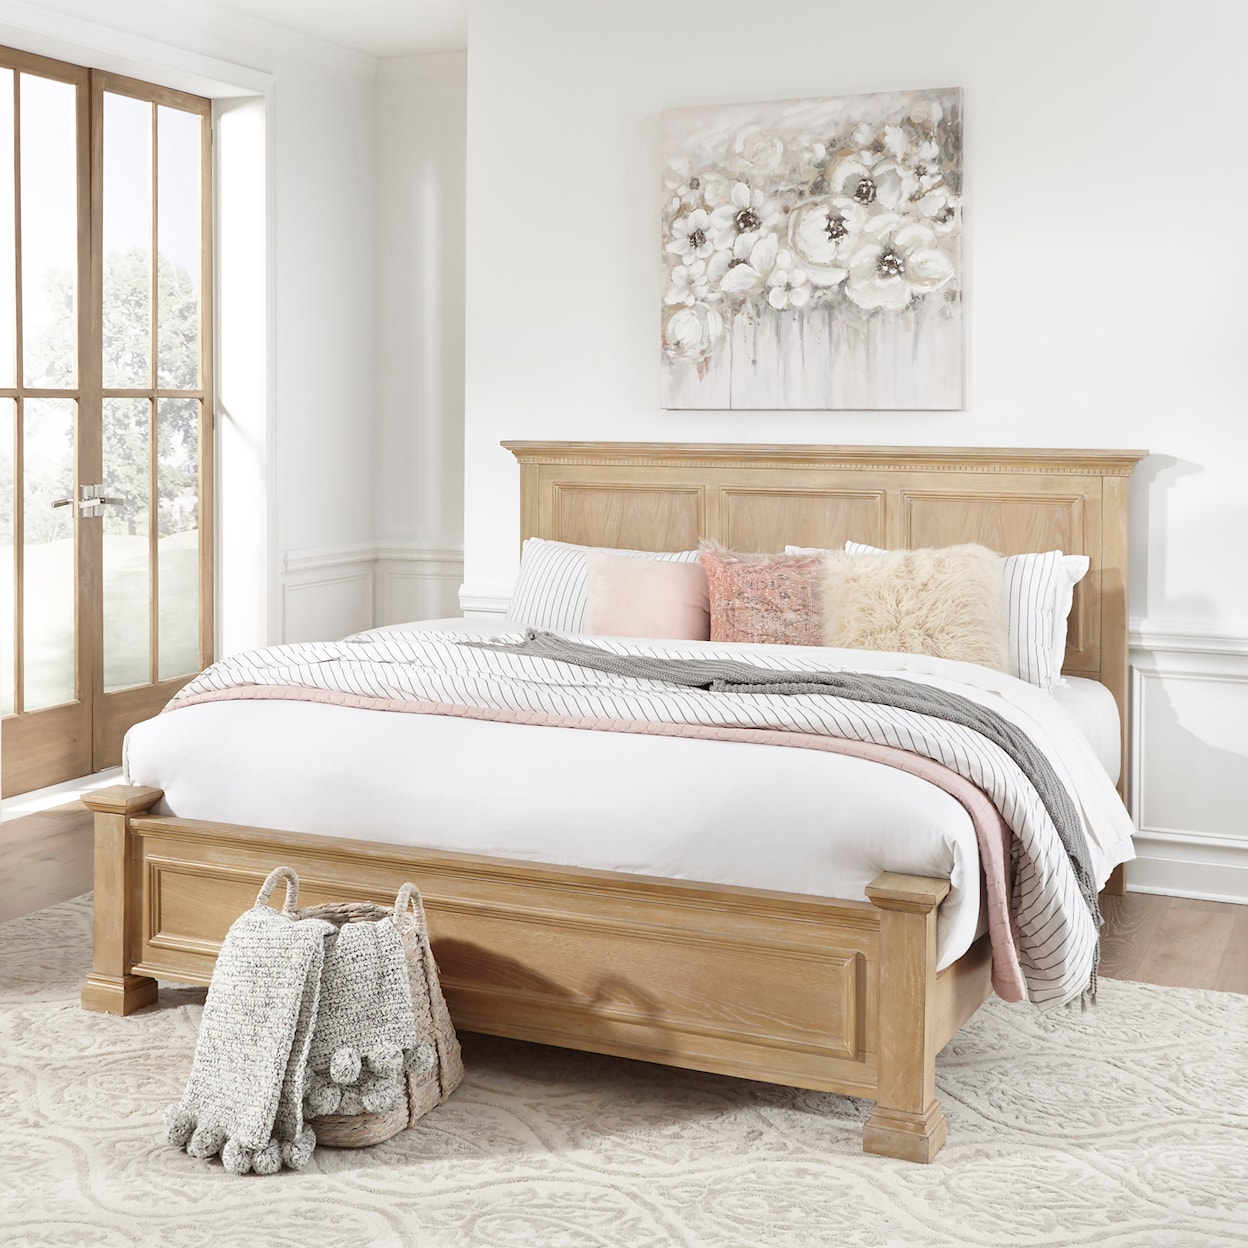 homestyles Manor House King Bed